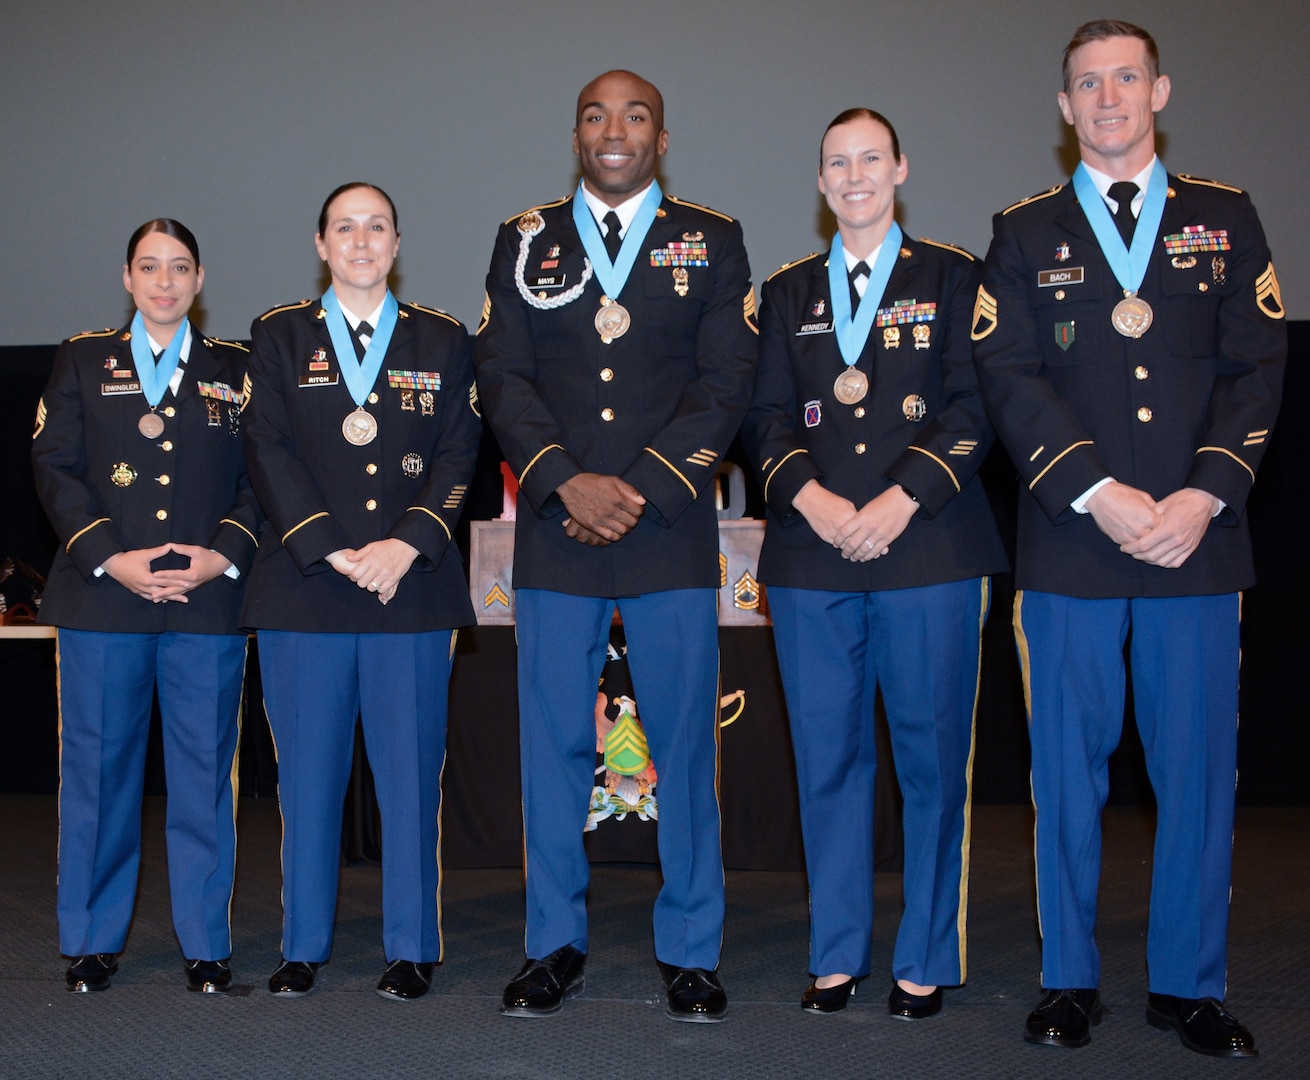 Sergeant Audie Murphy Club inductees (left to right) Staff Sgt. Jazmi I. Swingler, Staff Sgt. Brandy M. Ritch, Staff Sgt. Charles E. Mays Jr., Staff Sgt. Kacie M. Kennedy, and Staff Sgt. Alexander H. Bach.